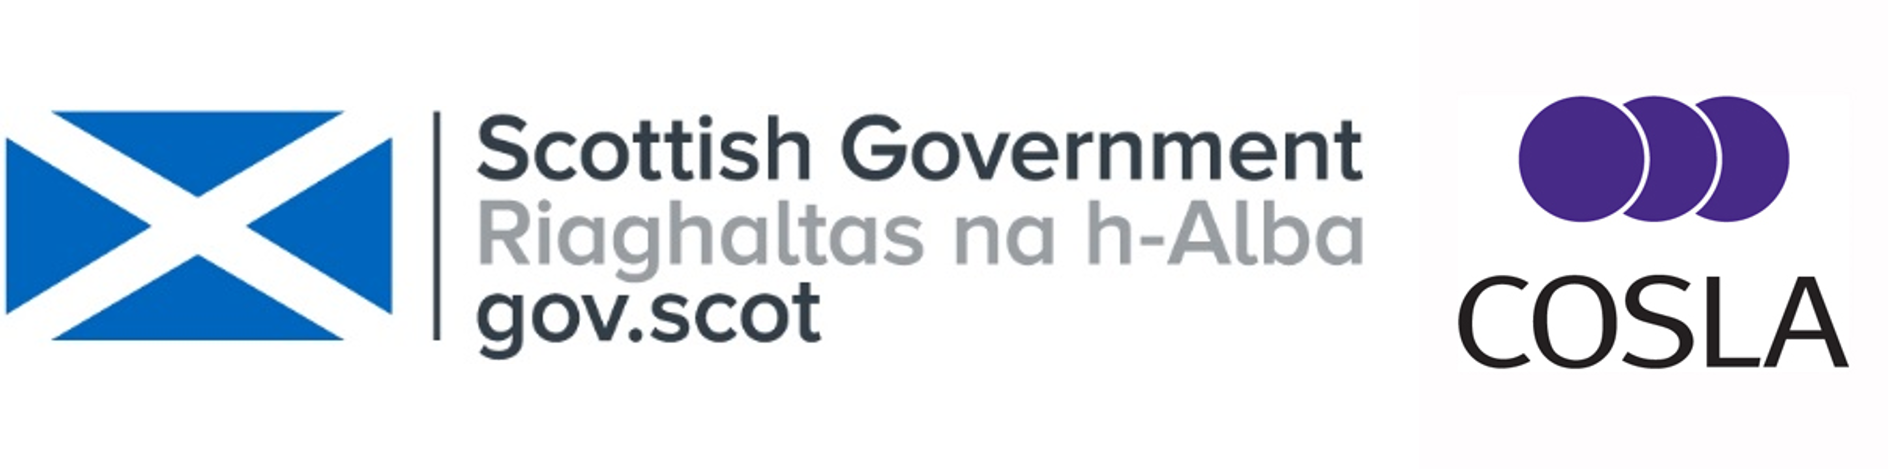 Scottish government logo and Convention of Scottish local authorities logo